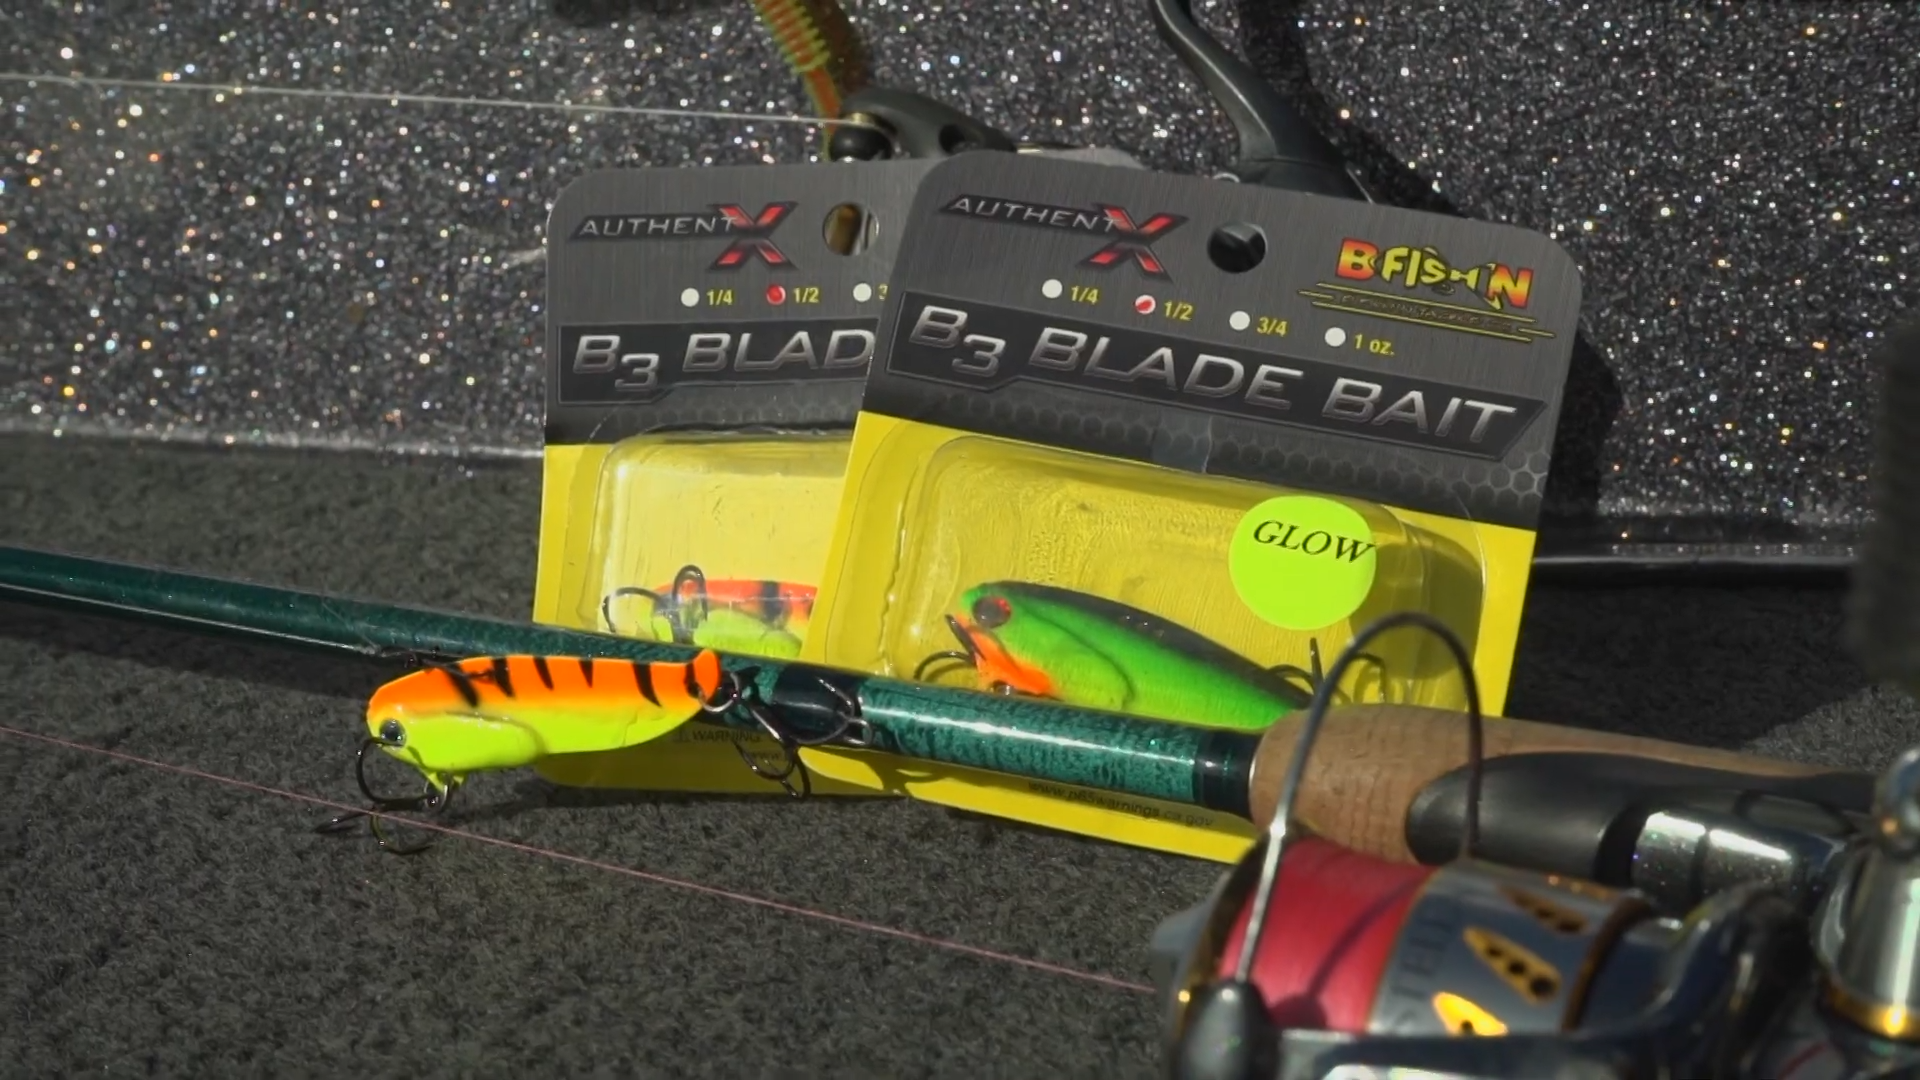 Fishing Blade Baits for Post Spawn Walleye on Lake Michigan 3-4 screenshot  - MidWest Outdoors